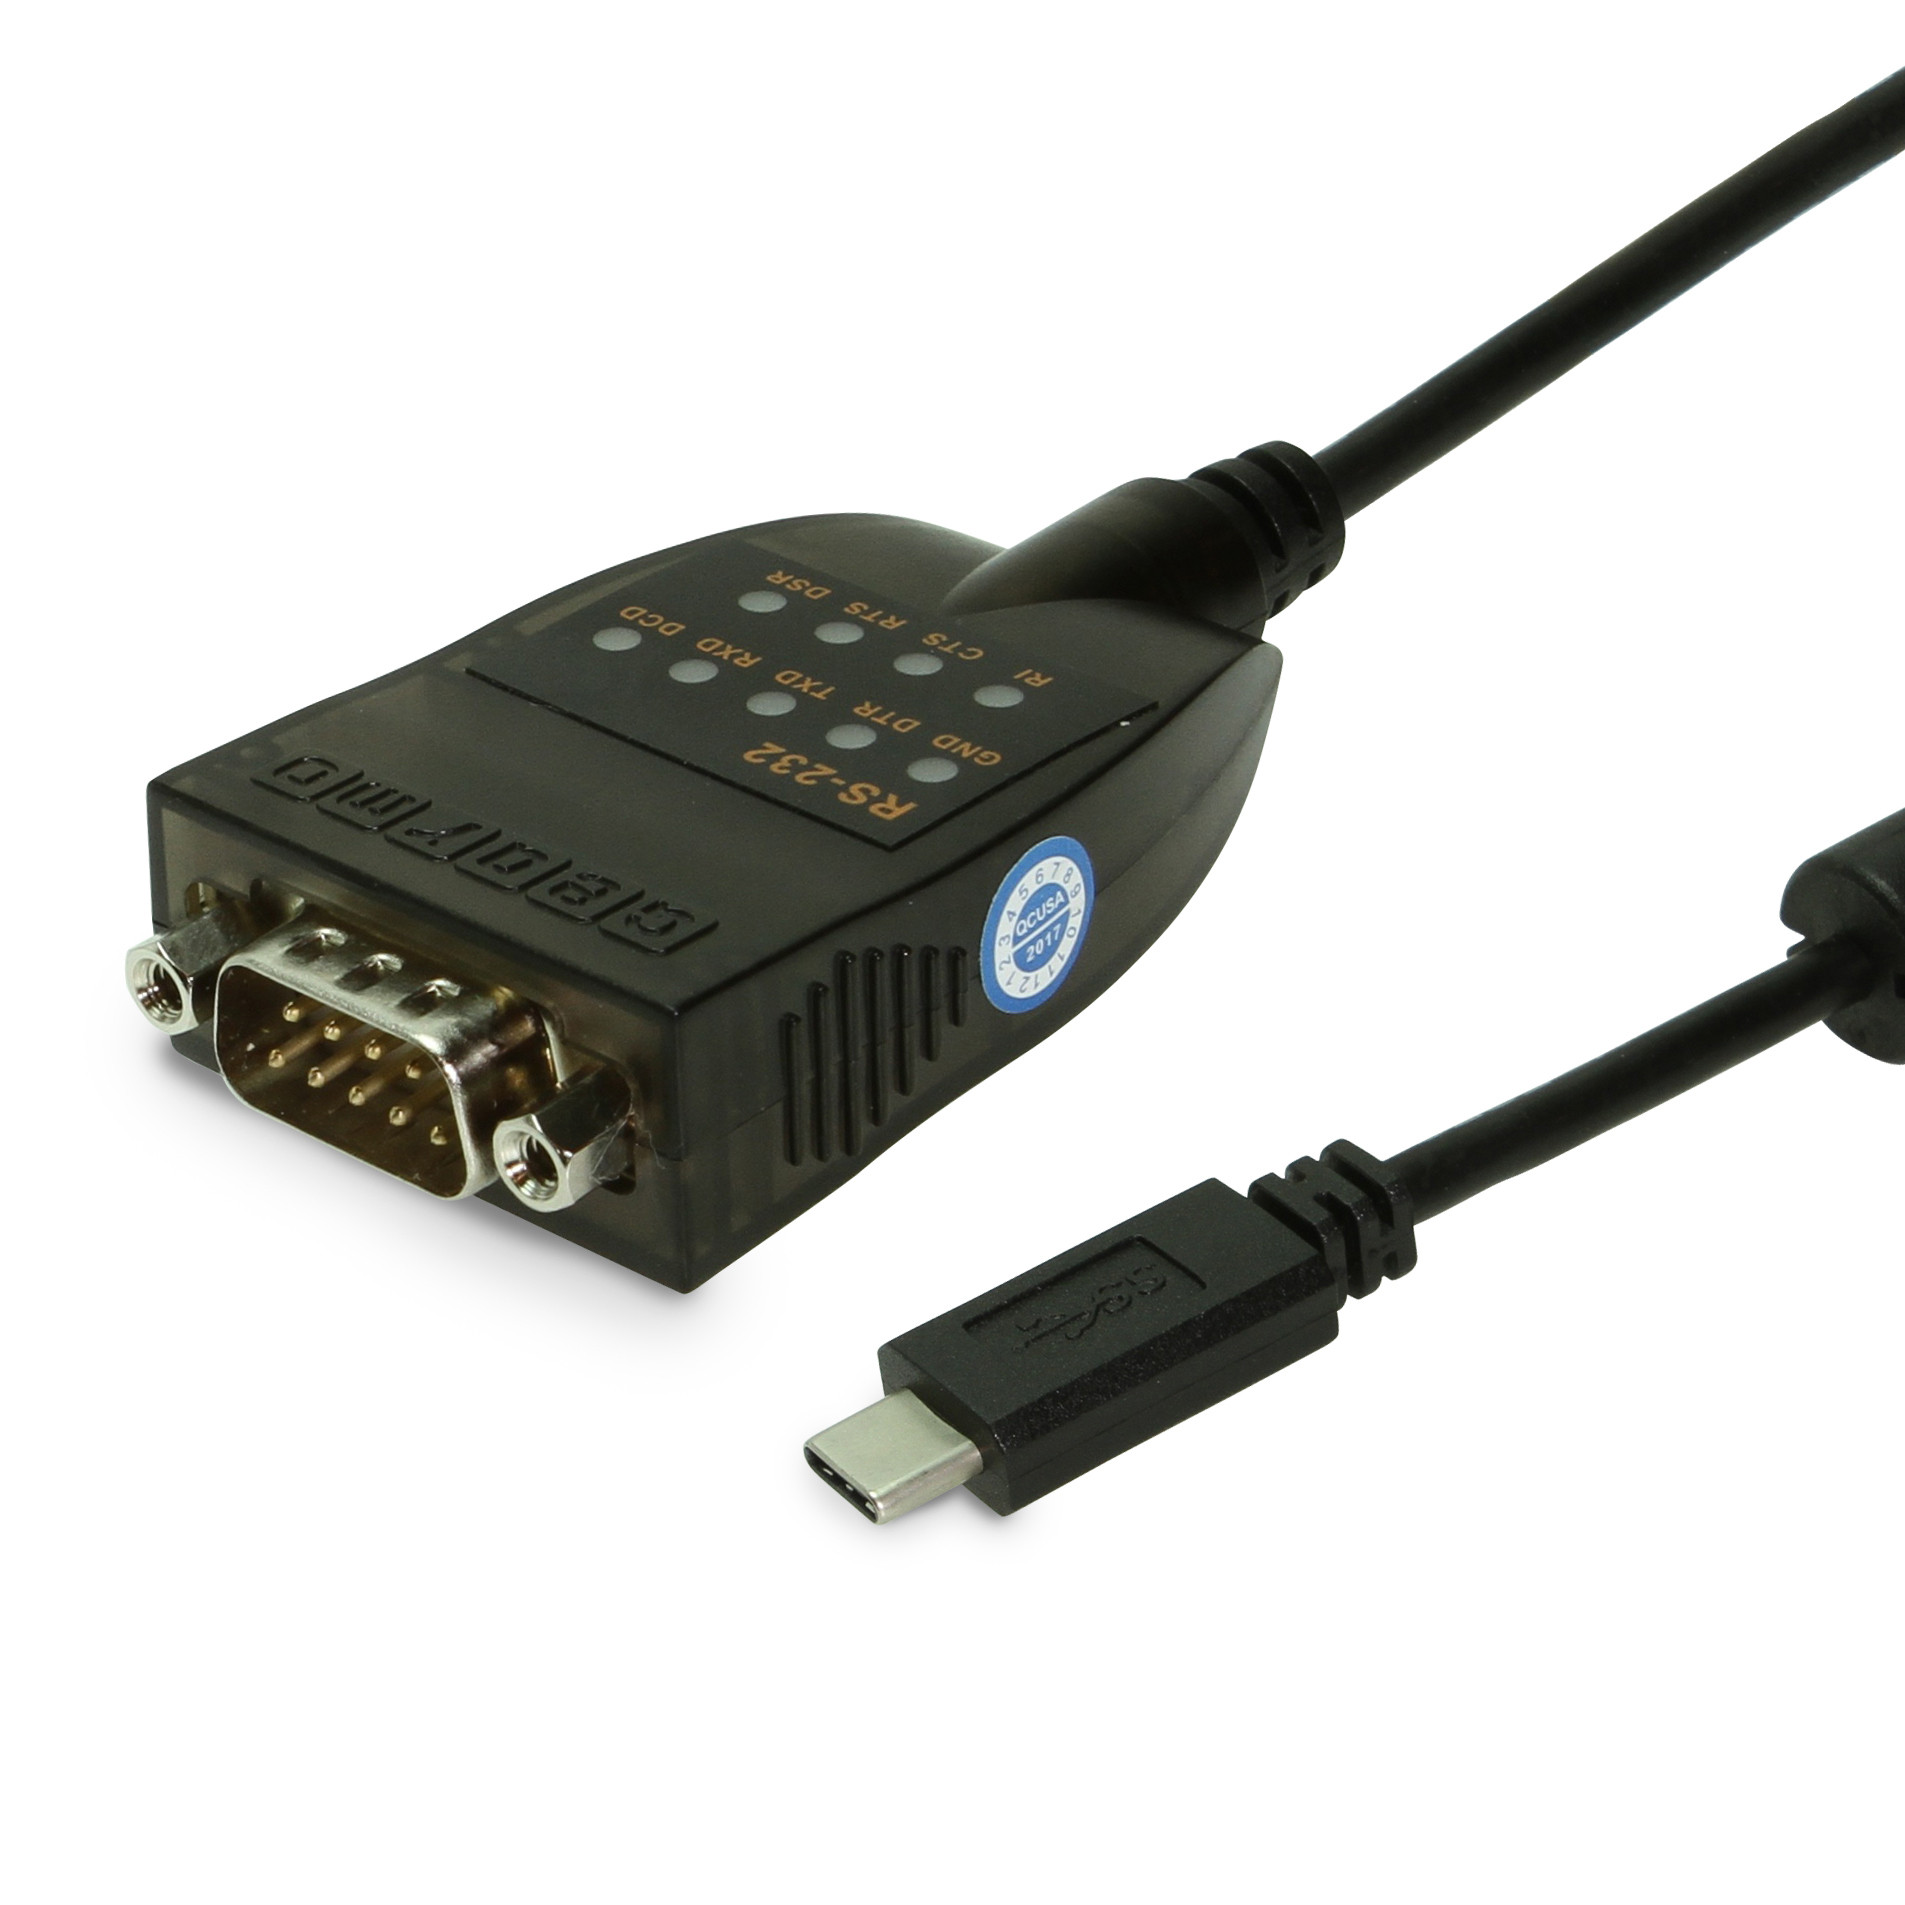 USB-C 2.0 to Serial RS-232 16 Inch Adapter w/ LED Indicators